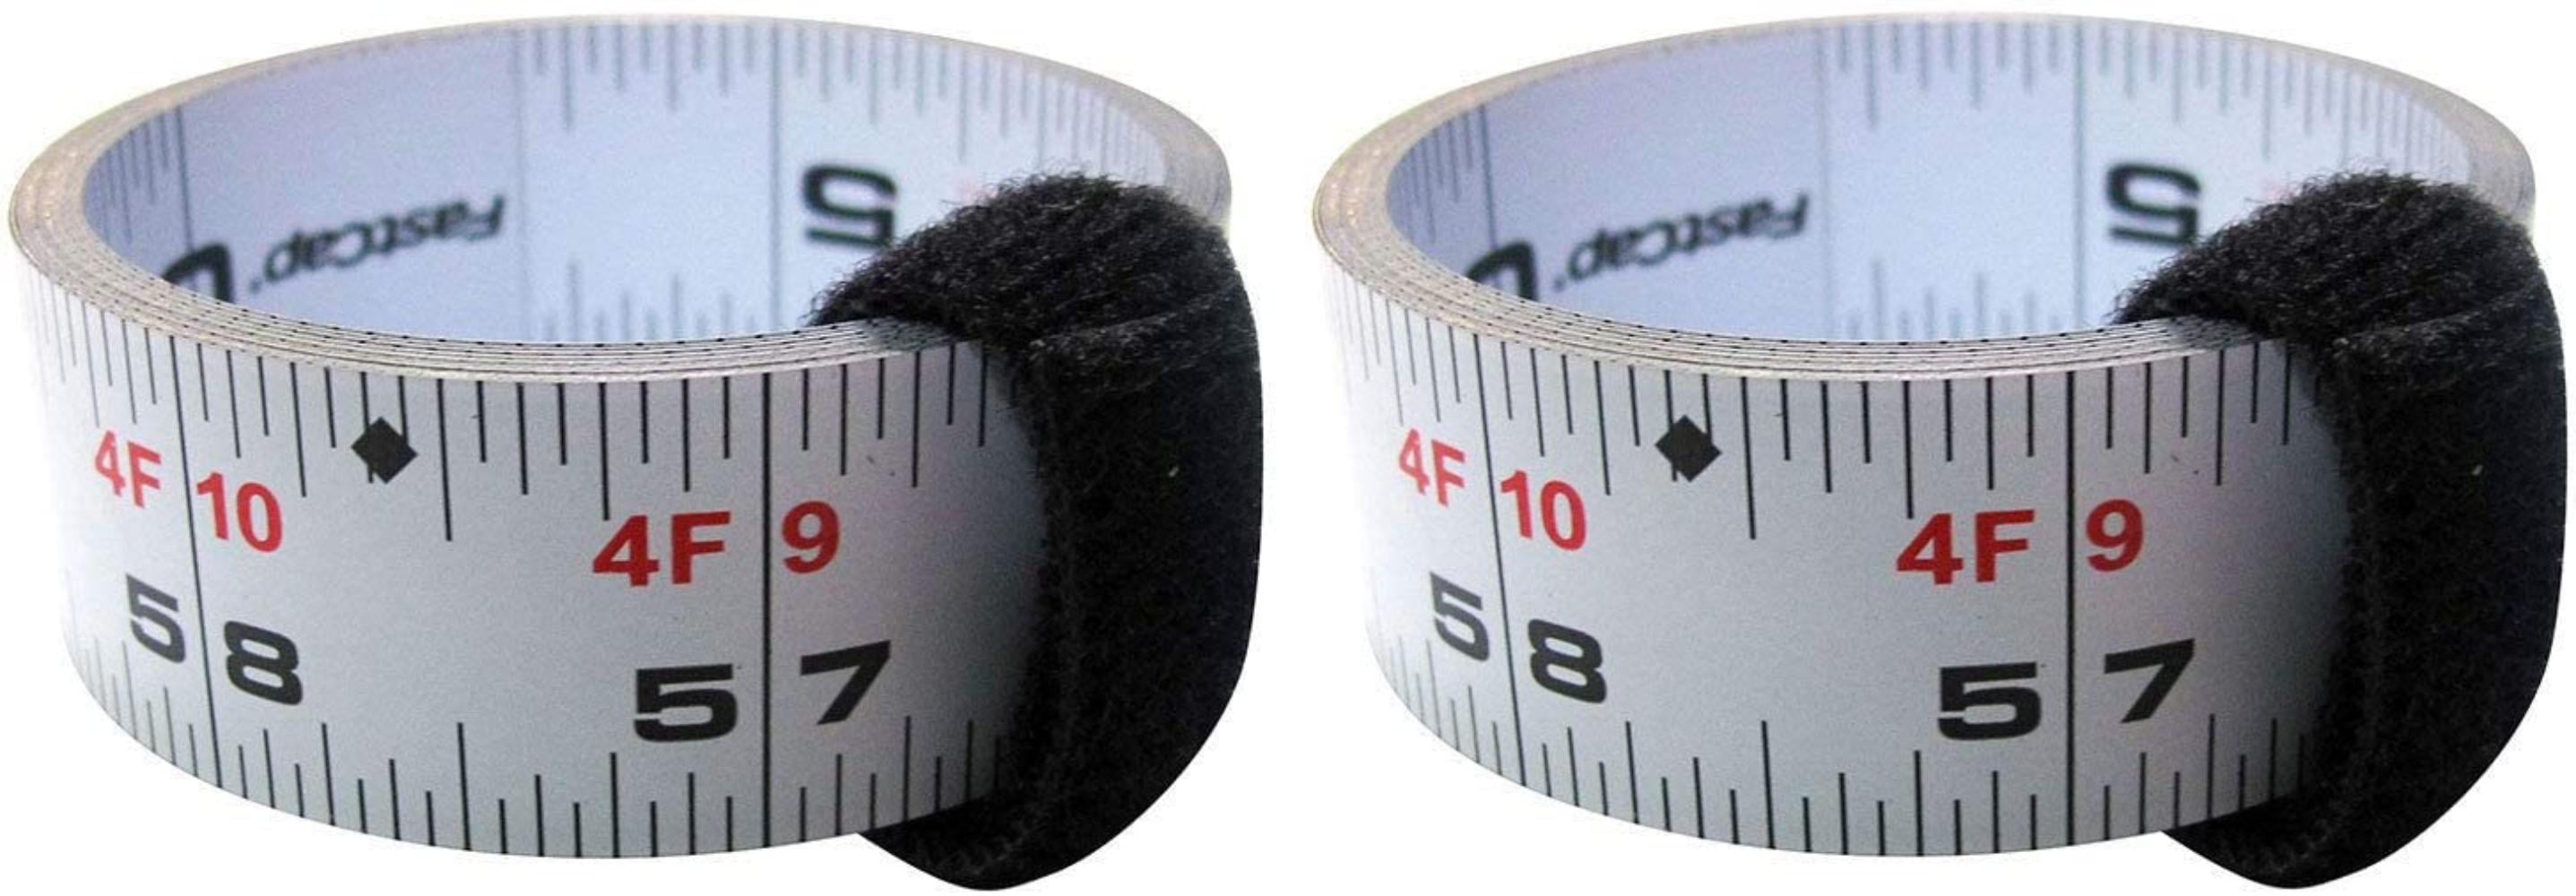 FastCap Self-adhesive 16 Measuring Tape Reversible Left or Right Read for sale online 